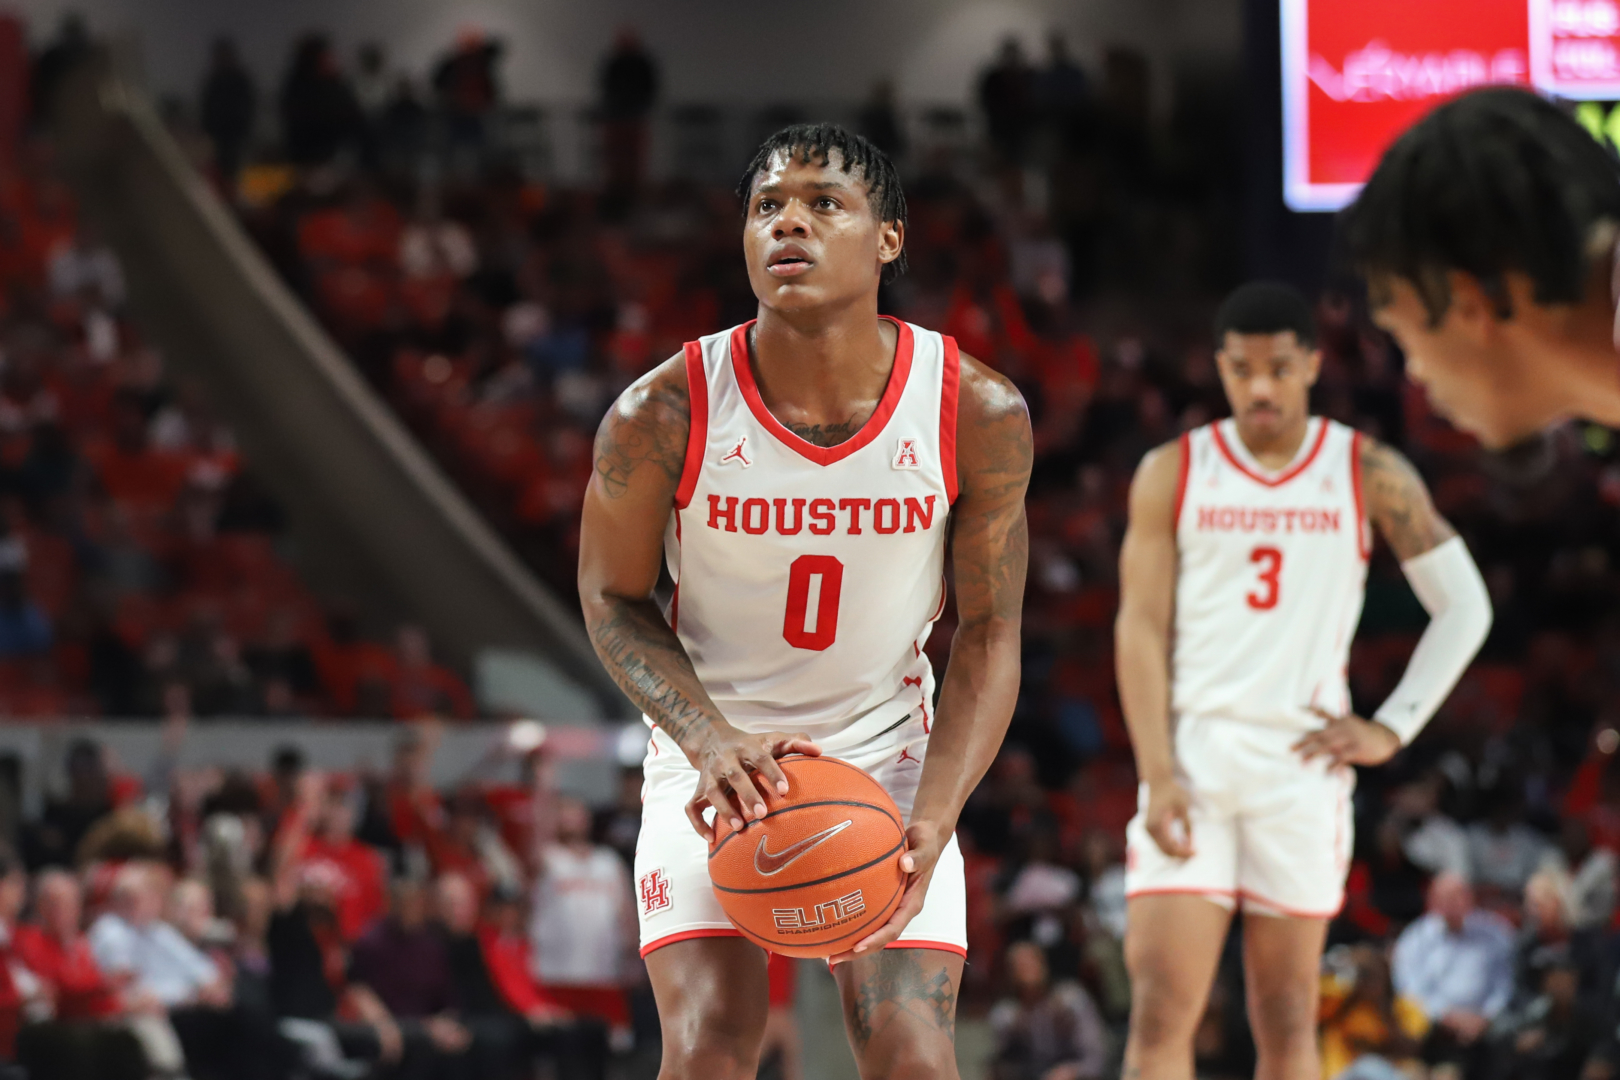 UH guard Marcus Sasser led the Cougars with 16 points in their most recent victory over Oregon on Sunday night. | Sean Thomas/The Cougar